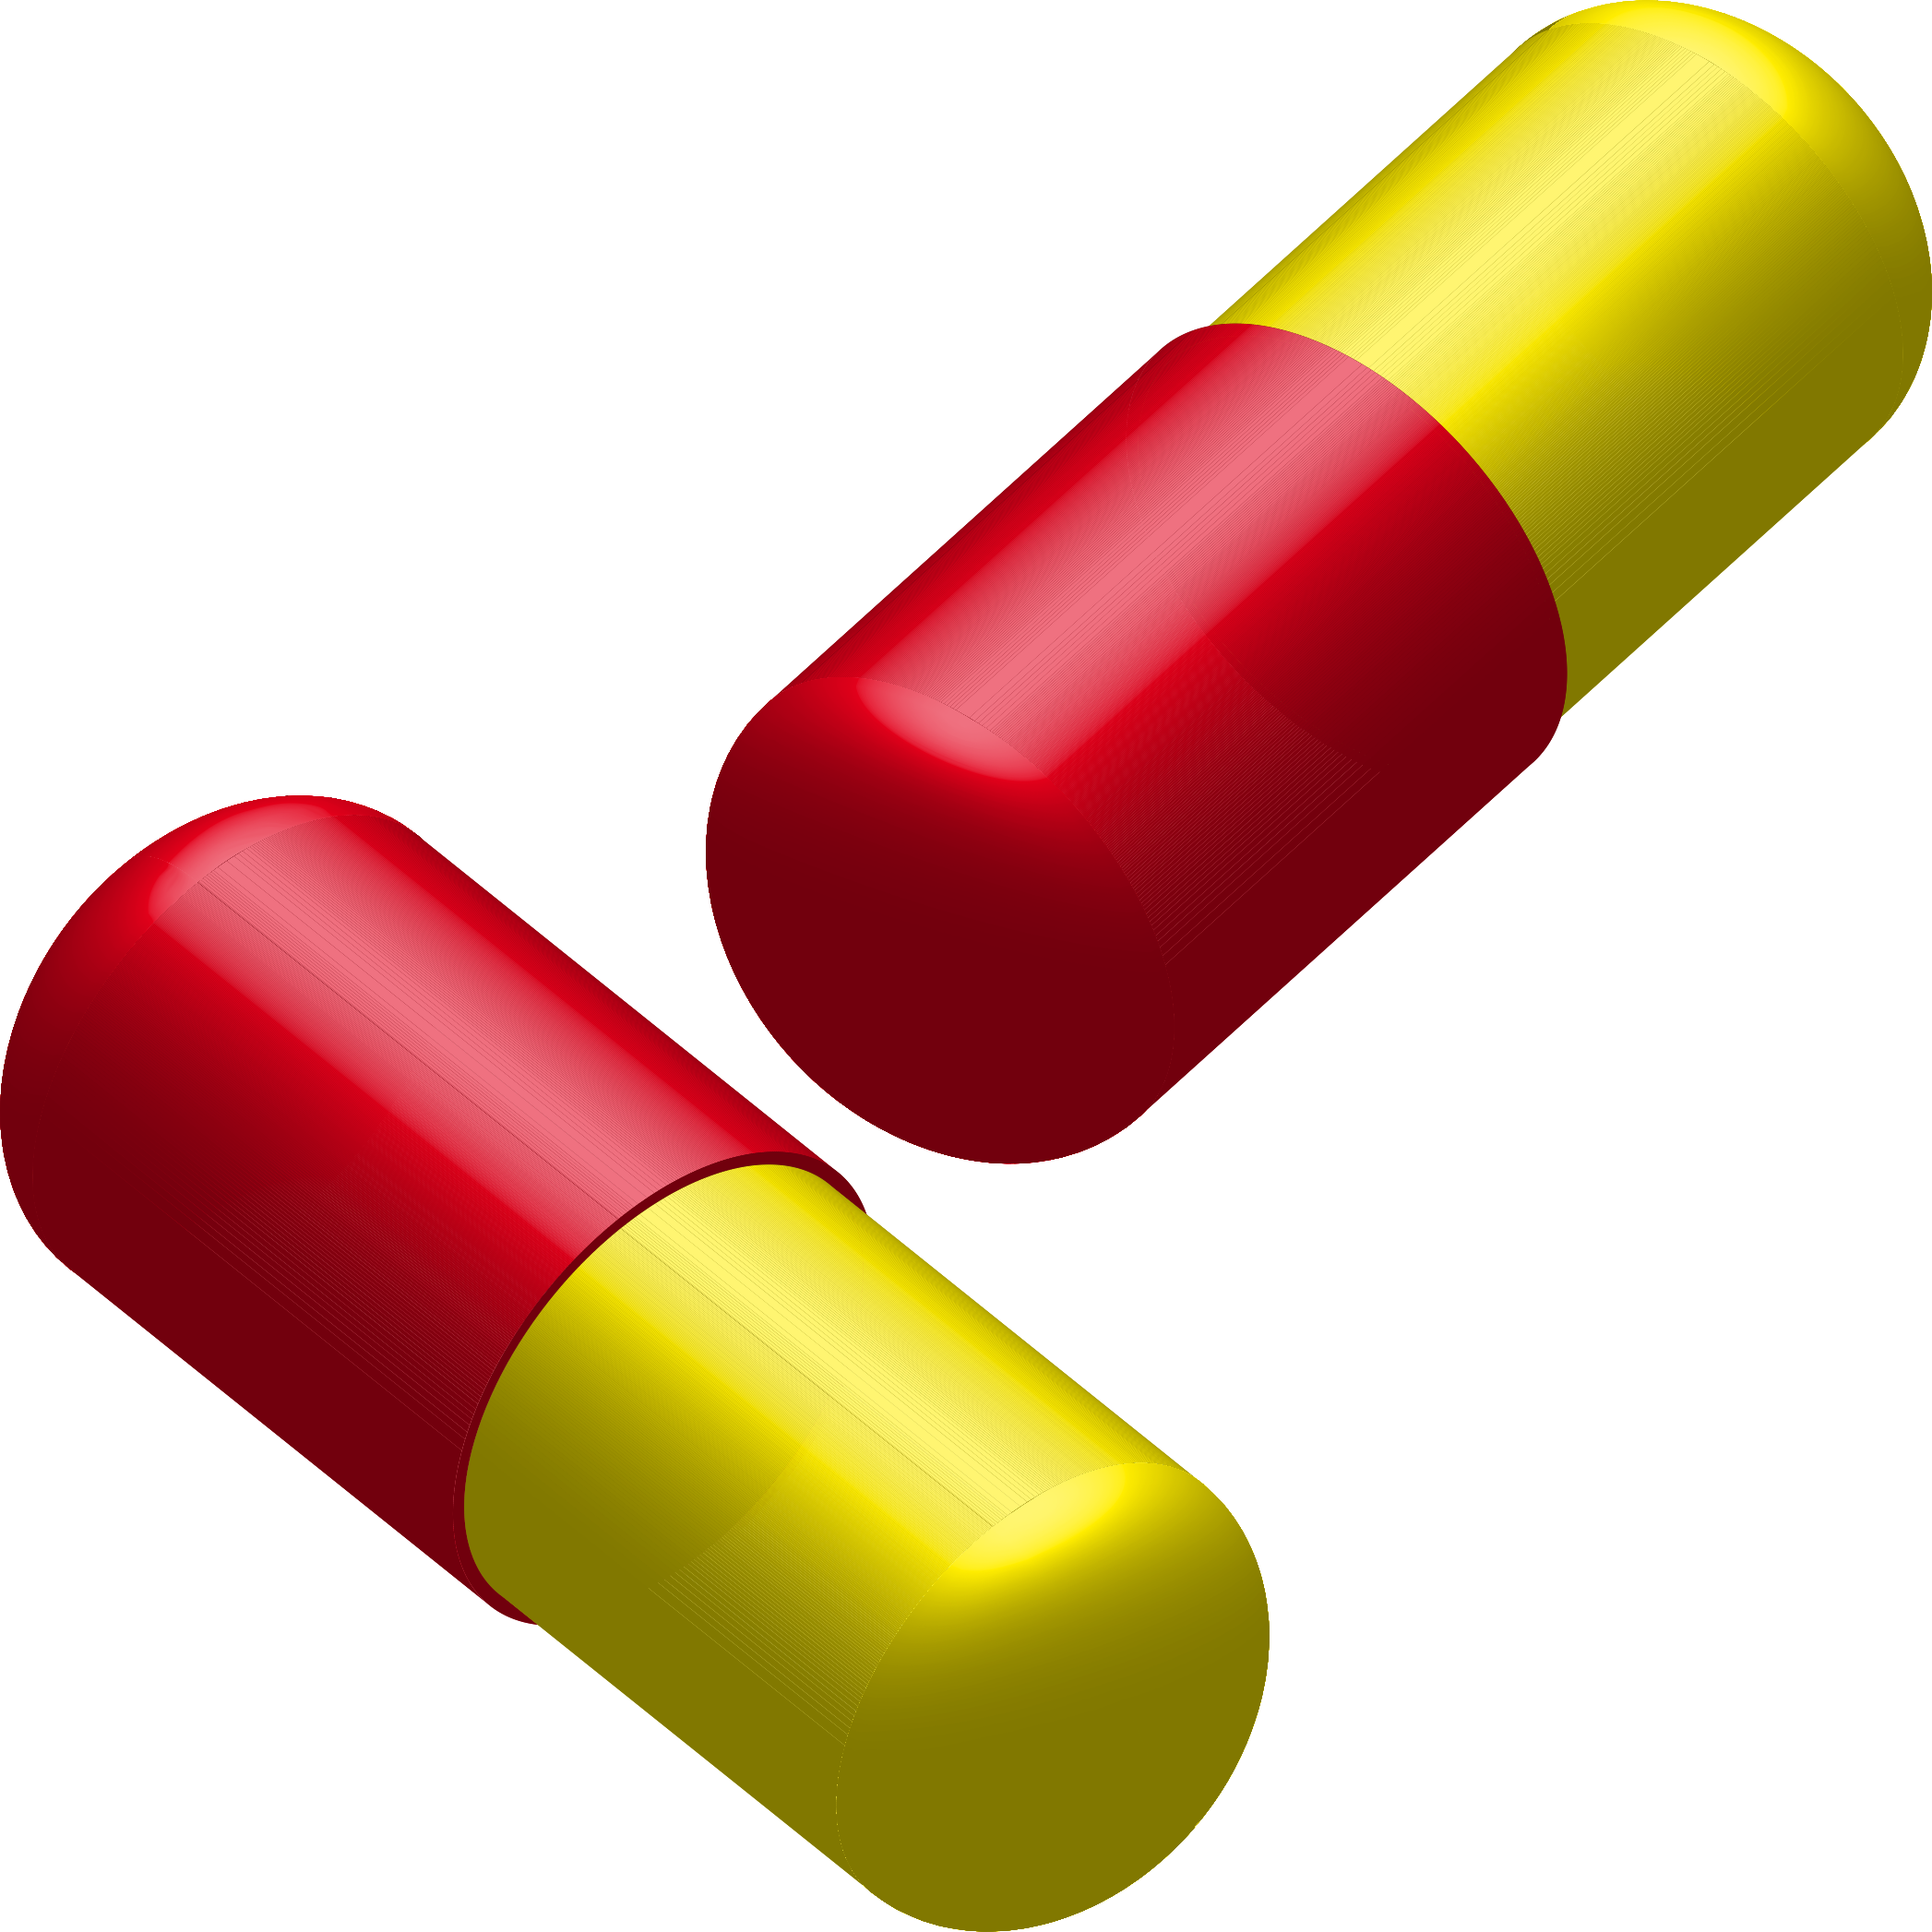 Capsules - Drugs .png (2094x2094)